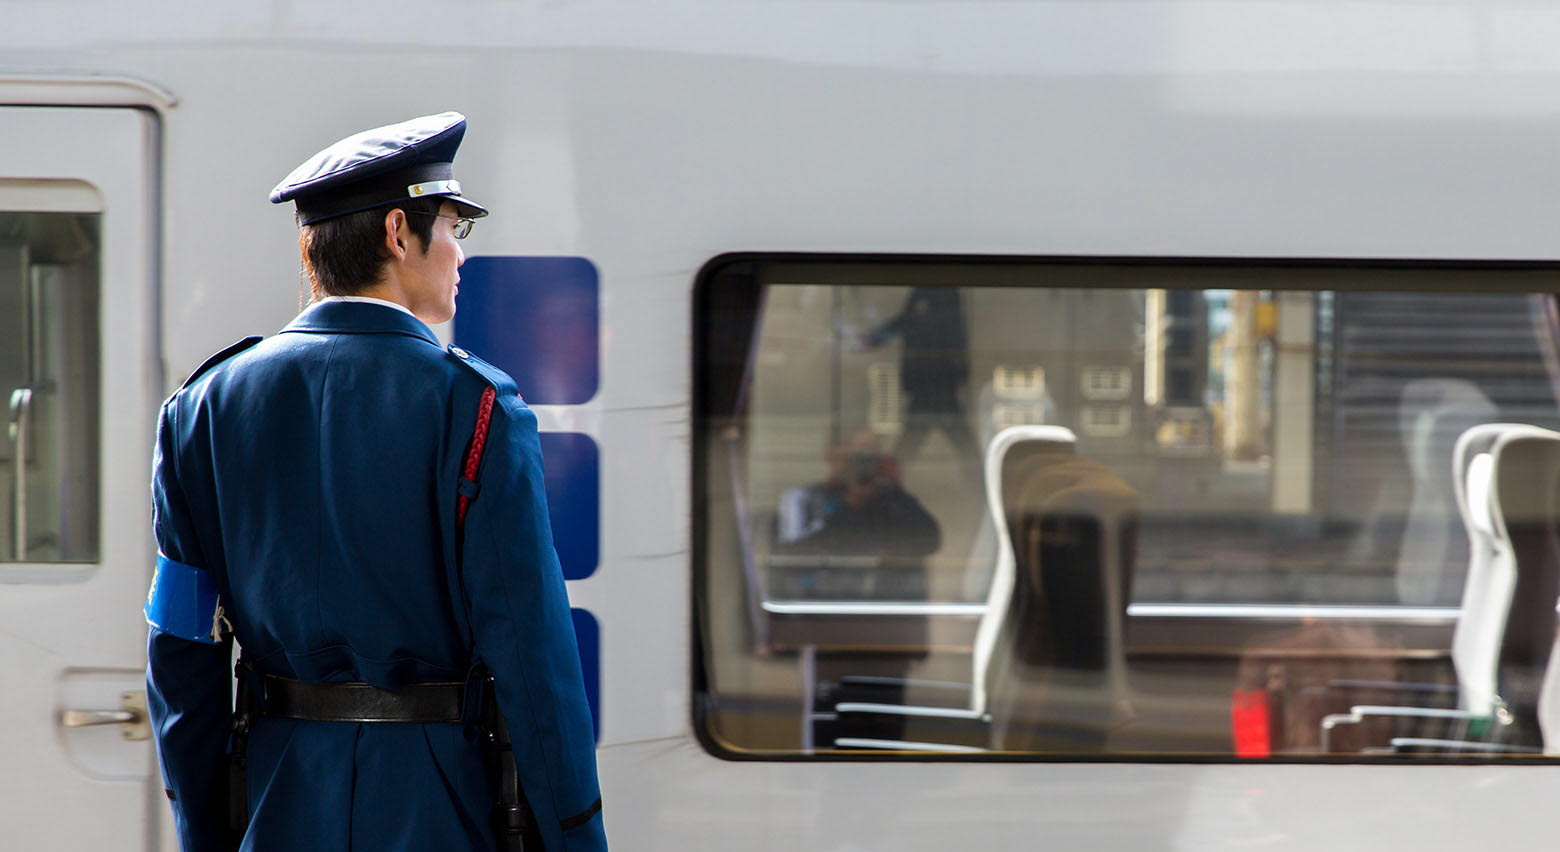 Train conductor in Japan